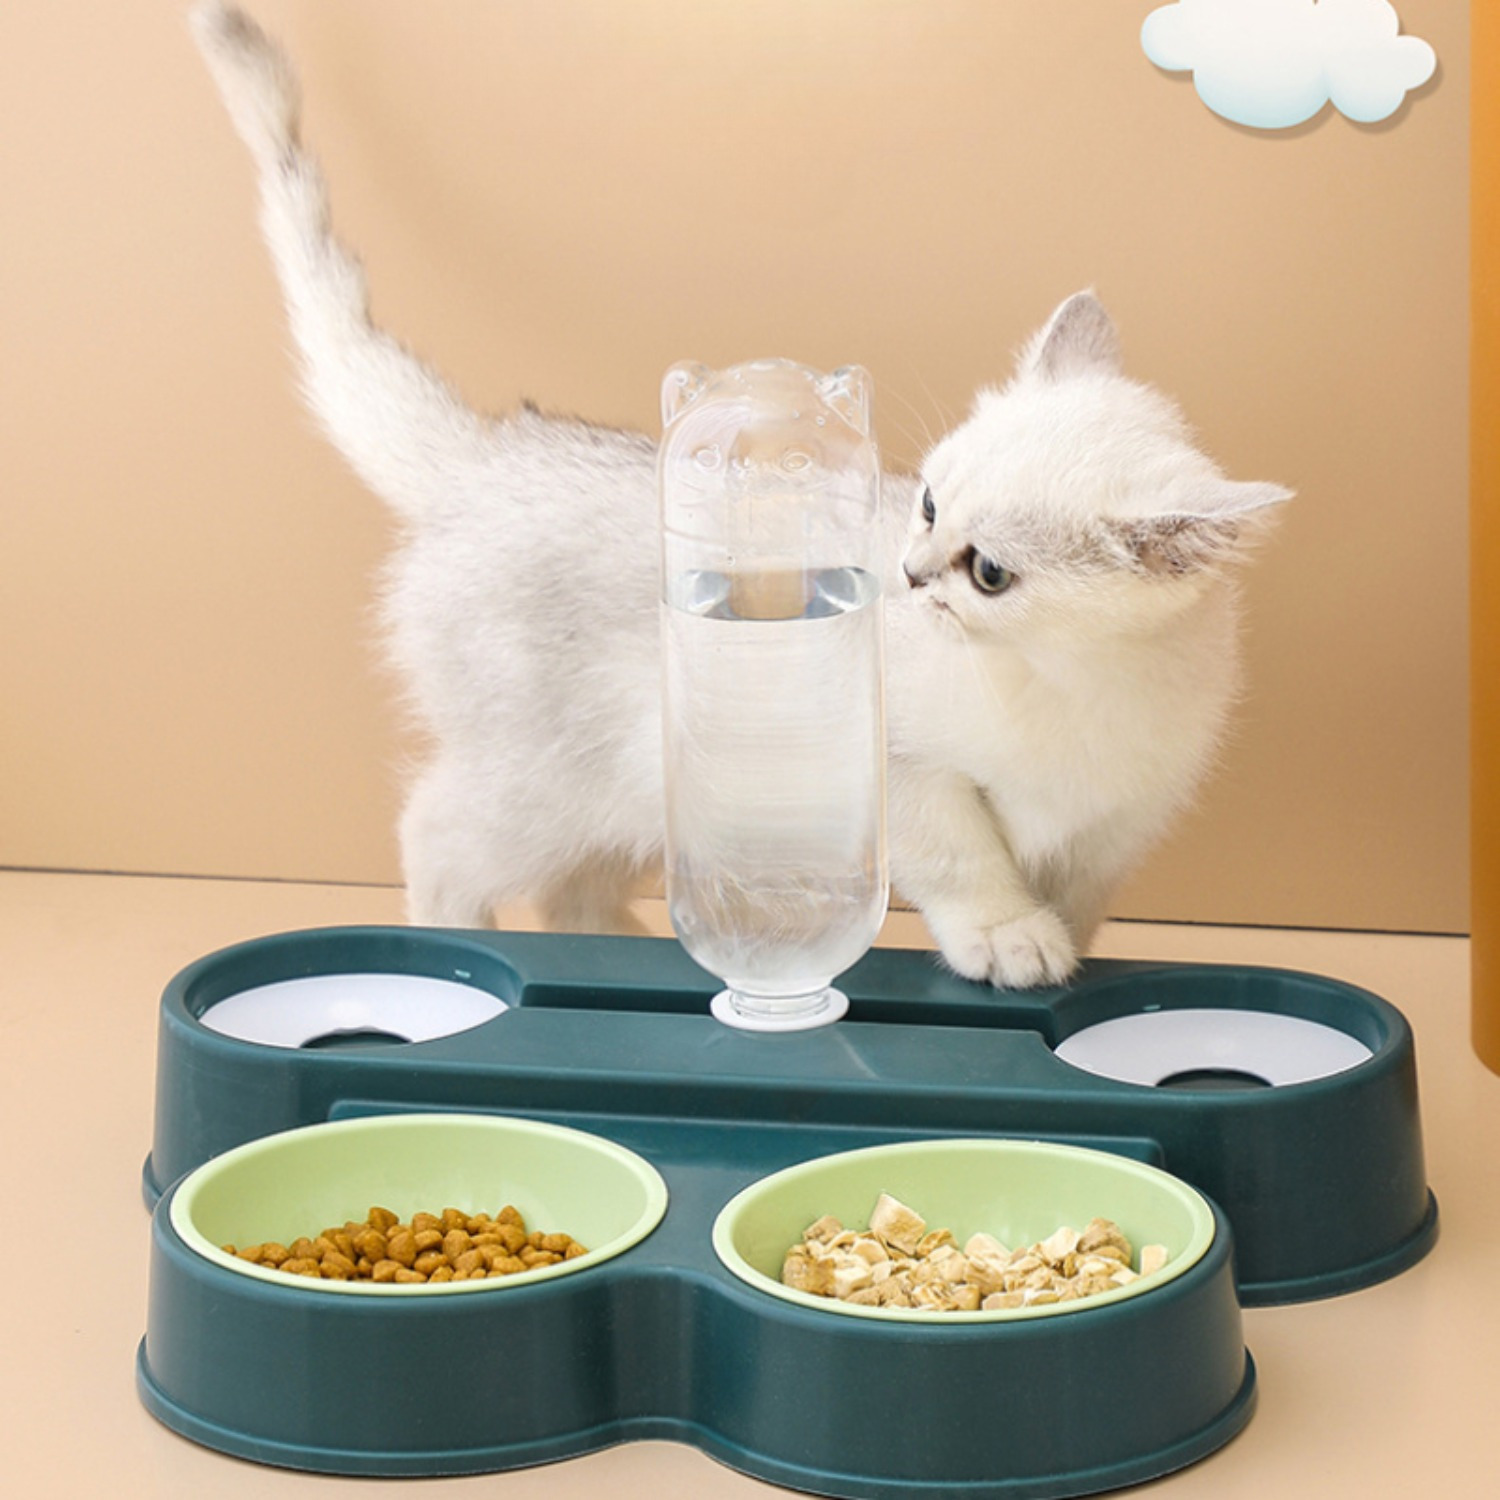 

1pc 2 In 1 Dog Cat Bowls Water And Food Bowl Set, Cat Bowls With Automatic Water Dispenser Bottle And Detachable Cat Dish, Pet Feeder For Small Or Medium Dogs Cats Puppy Kitten Rabbit